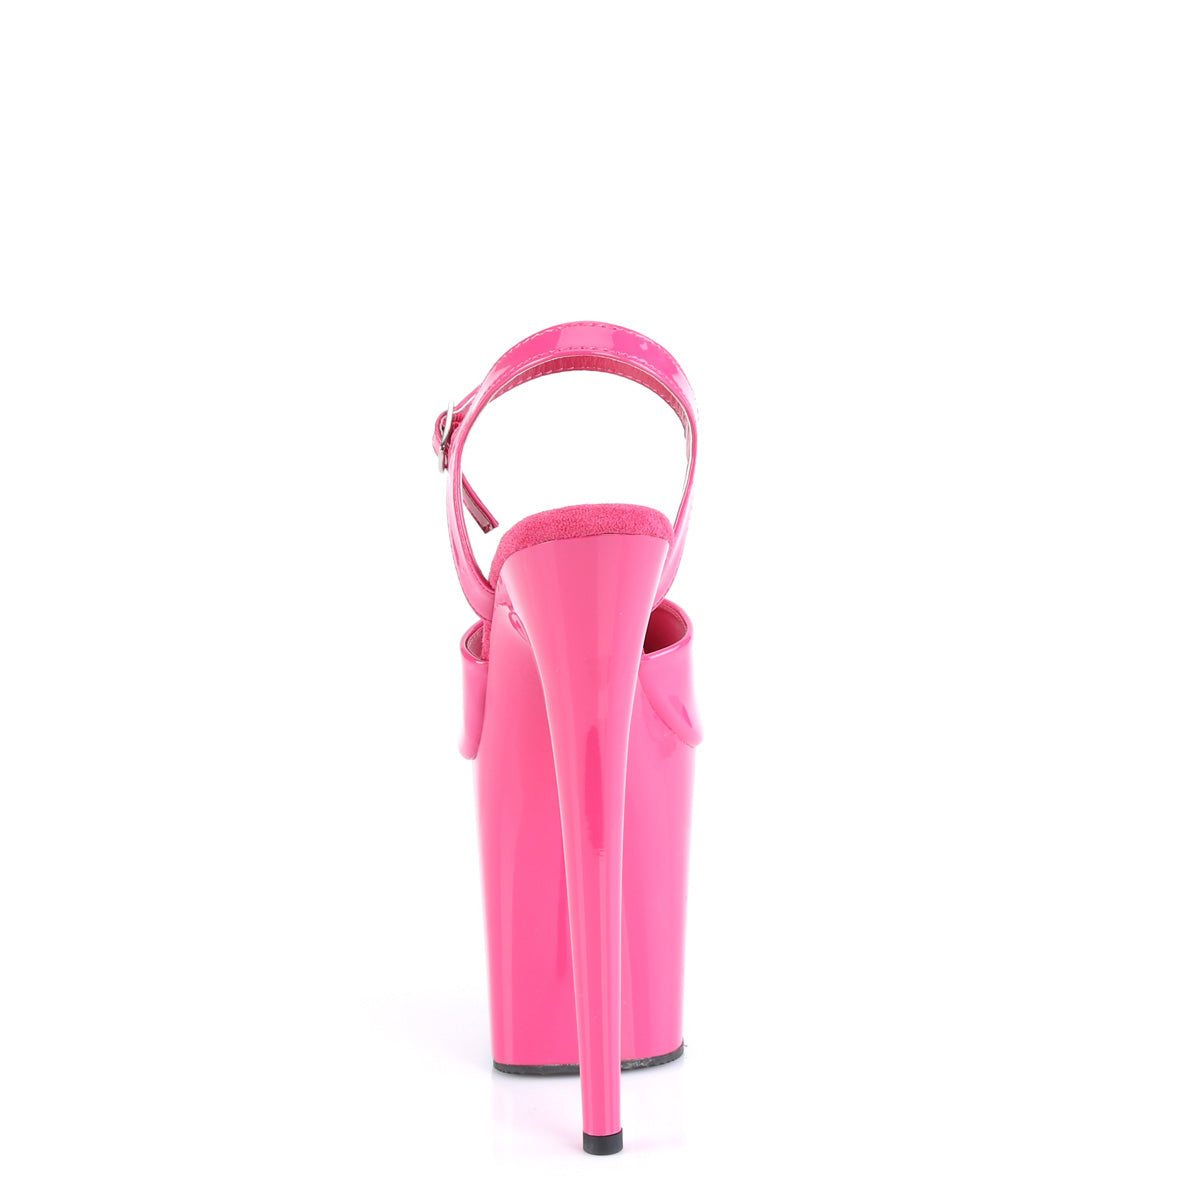 FLAMINGO-809 Pleaser 8" Inches High Heel Pleasers Hot Pink